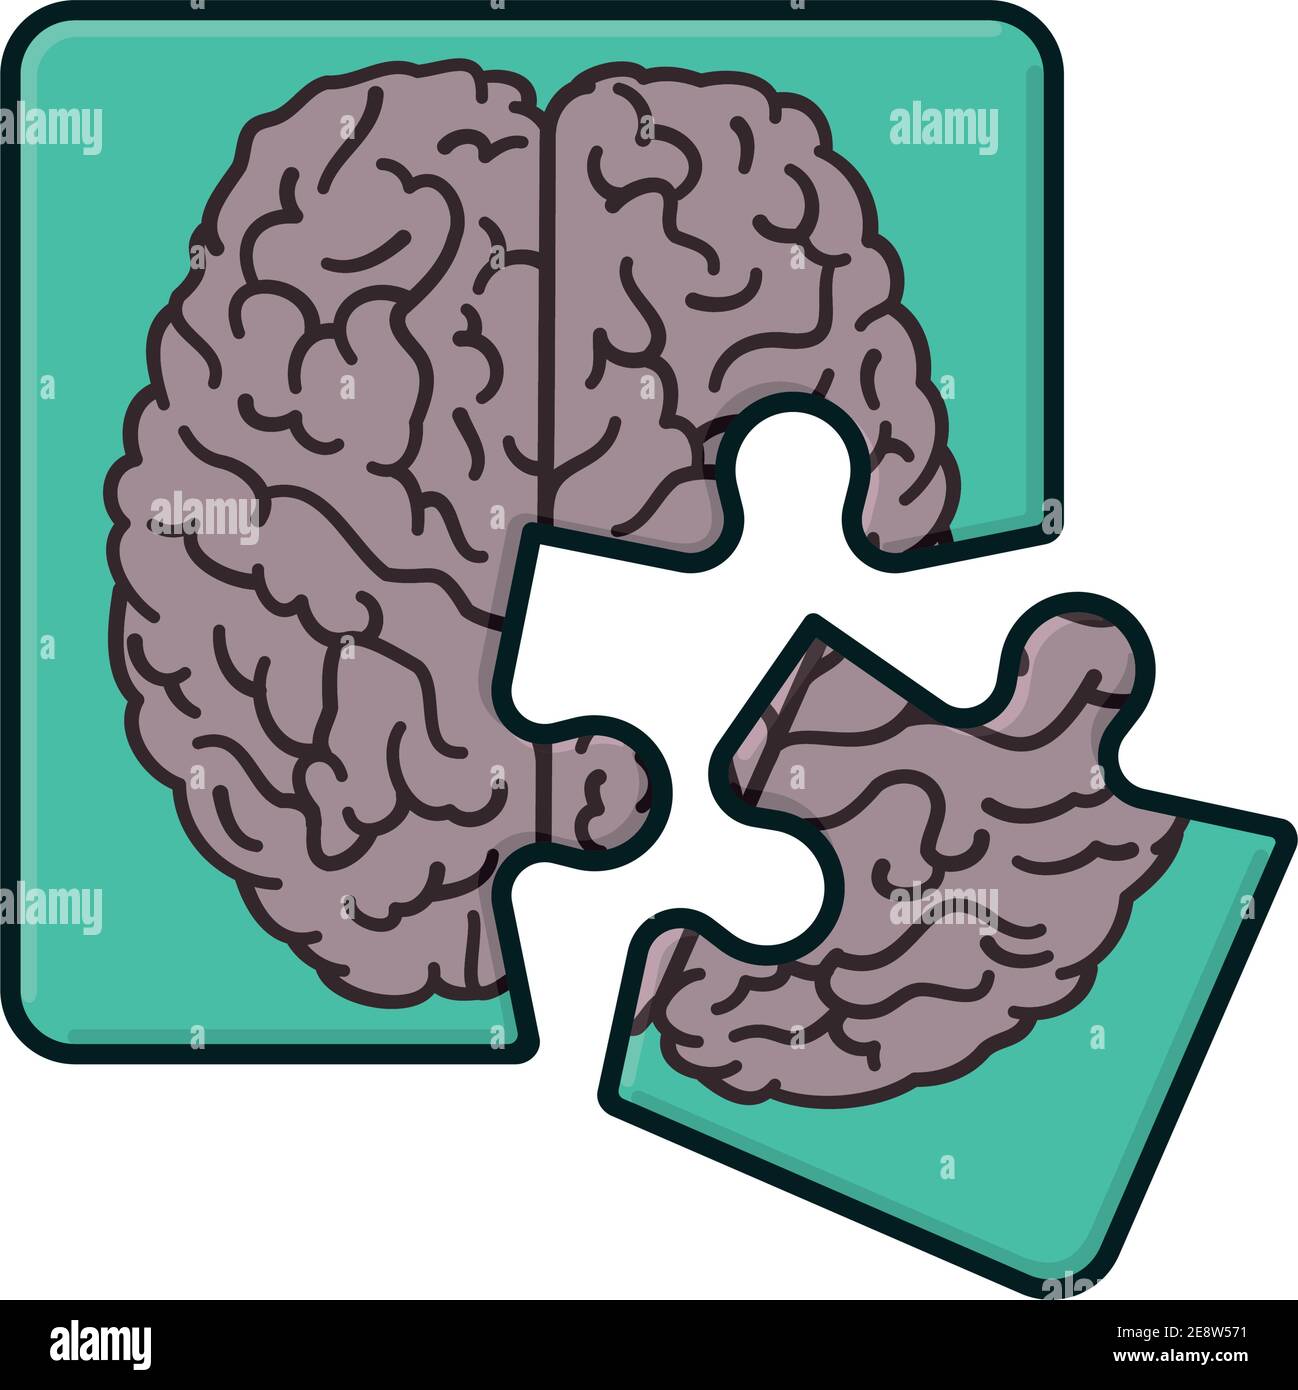 Jigsaw puzzle with brain picture isolated vector illustration for Alzheimers Day on September 21. Loss of memory concept Stock Vector